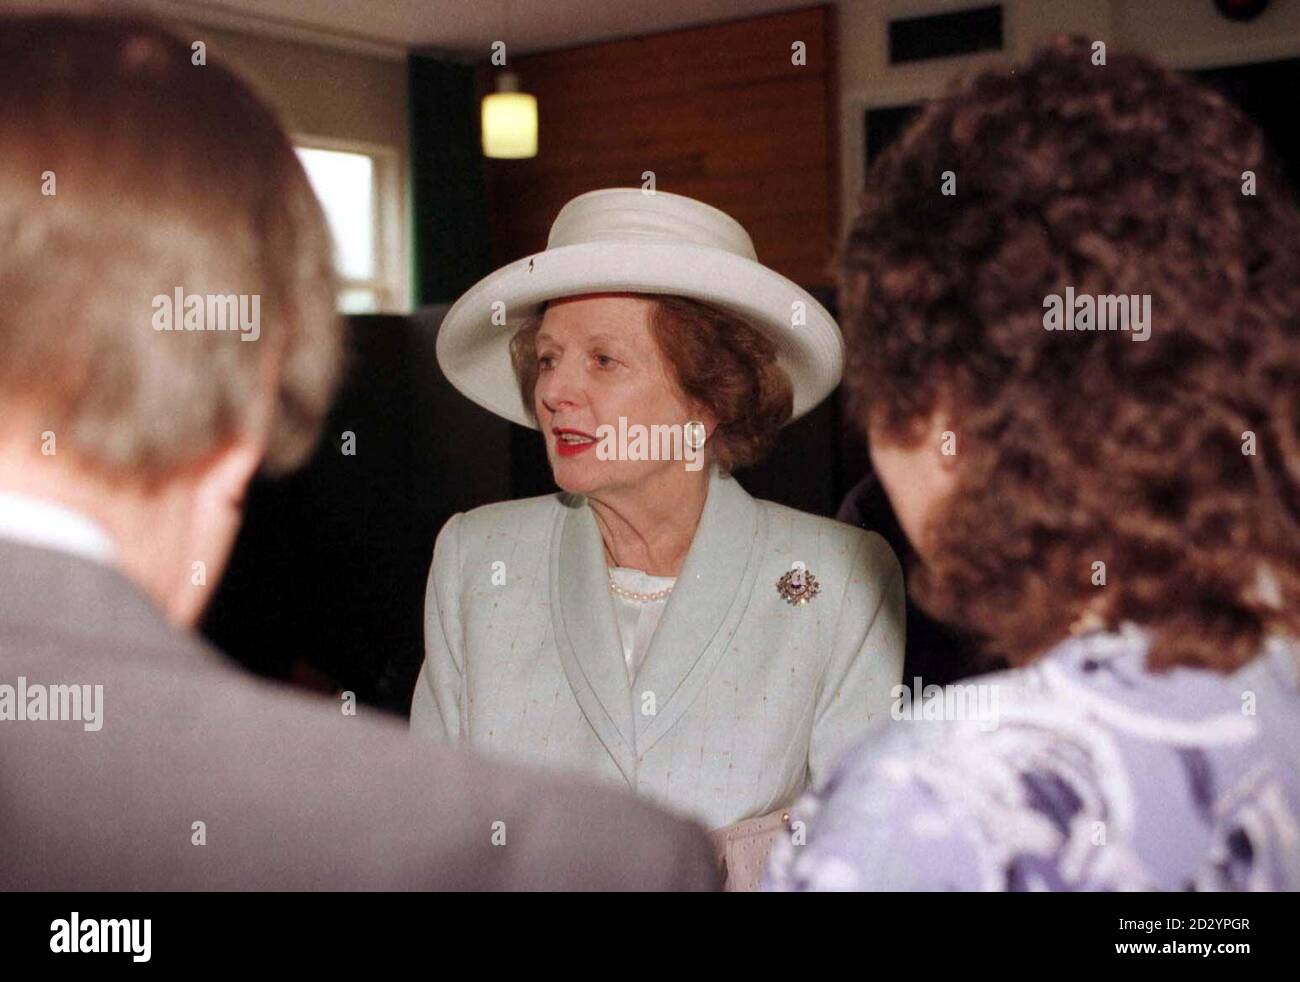 Baroness Thatcher talks with Falkland war veterans and Falklands Islanders who had been flown to Britain by the RAF as guests of honour at a reunion day in Browning Barracks, Aldershot to mark the 16th anniversary of the Falklands War today (Saturday). Photo Tim Ockenden/PA Stock Photo